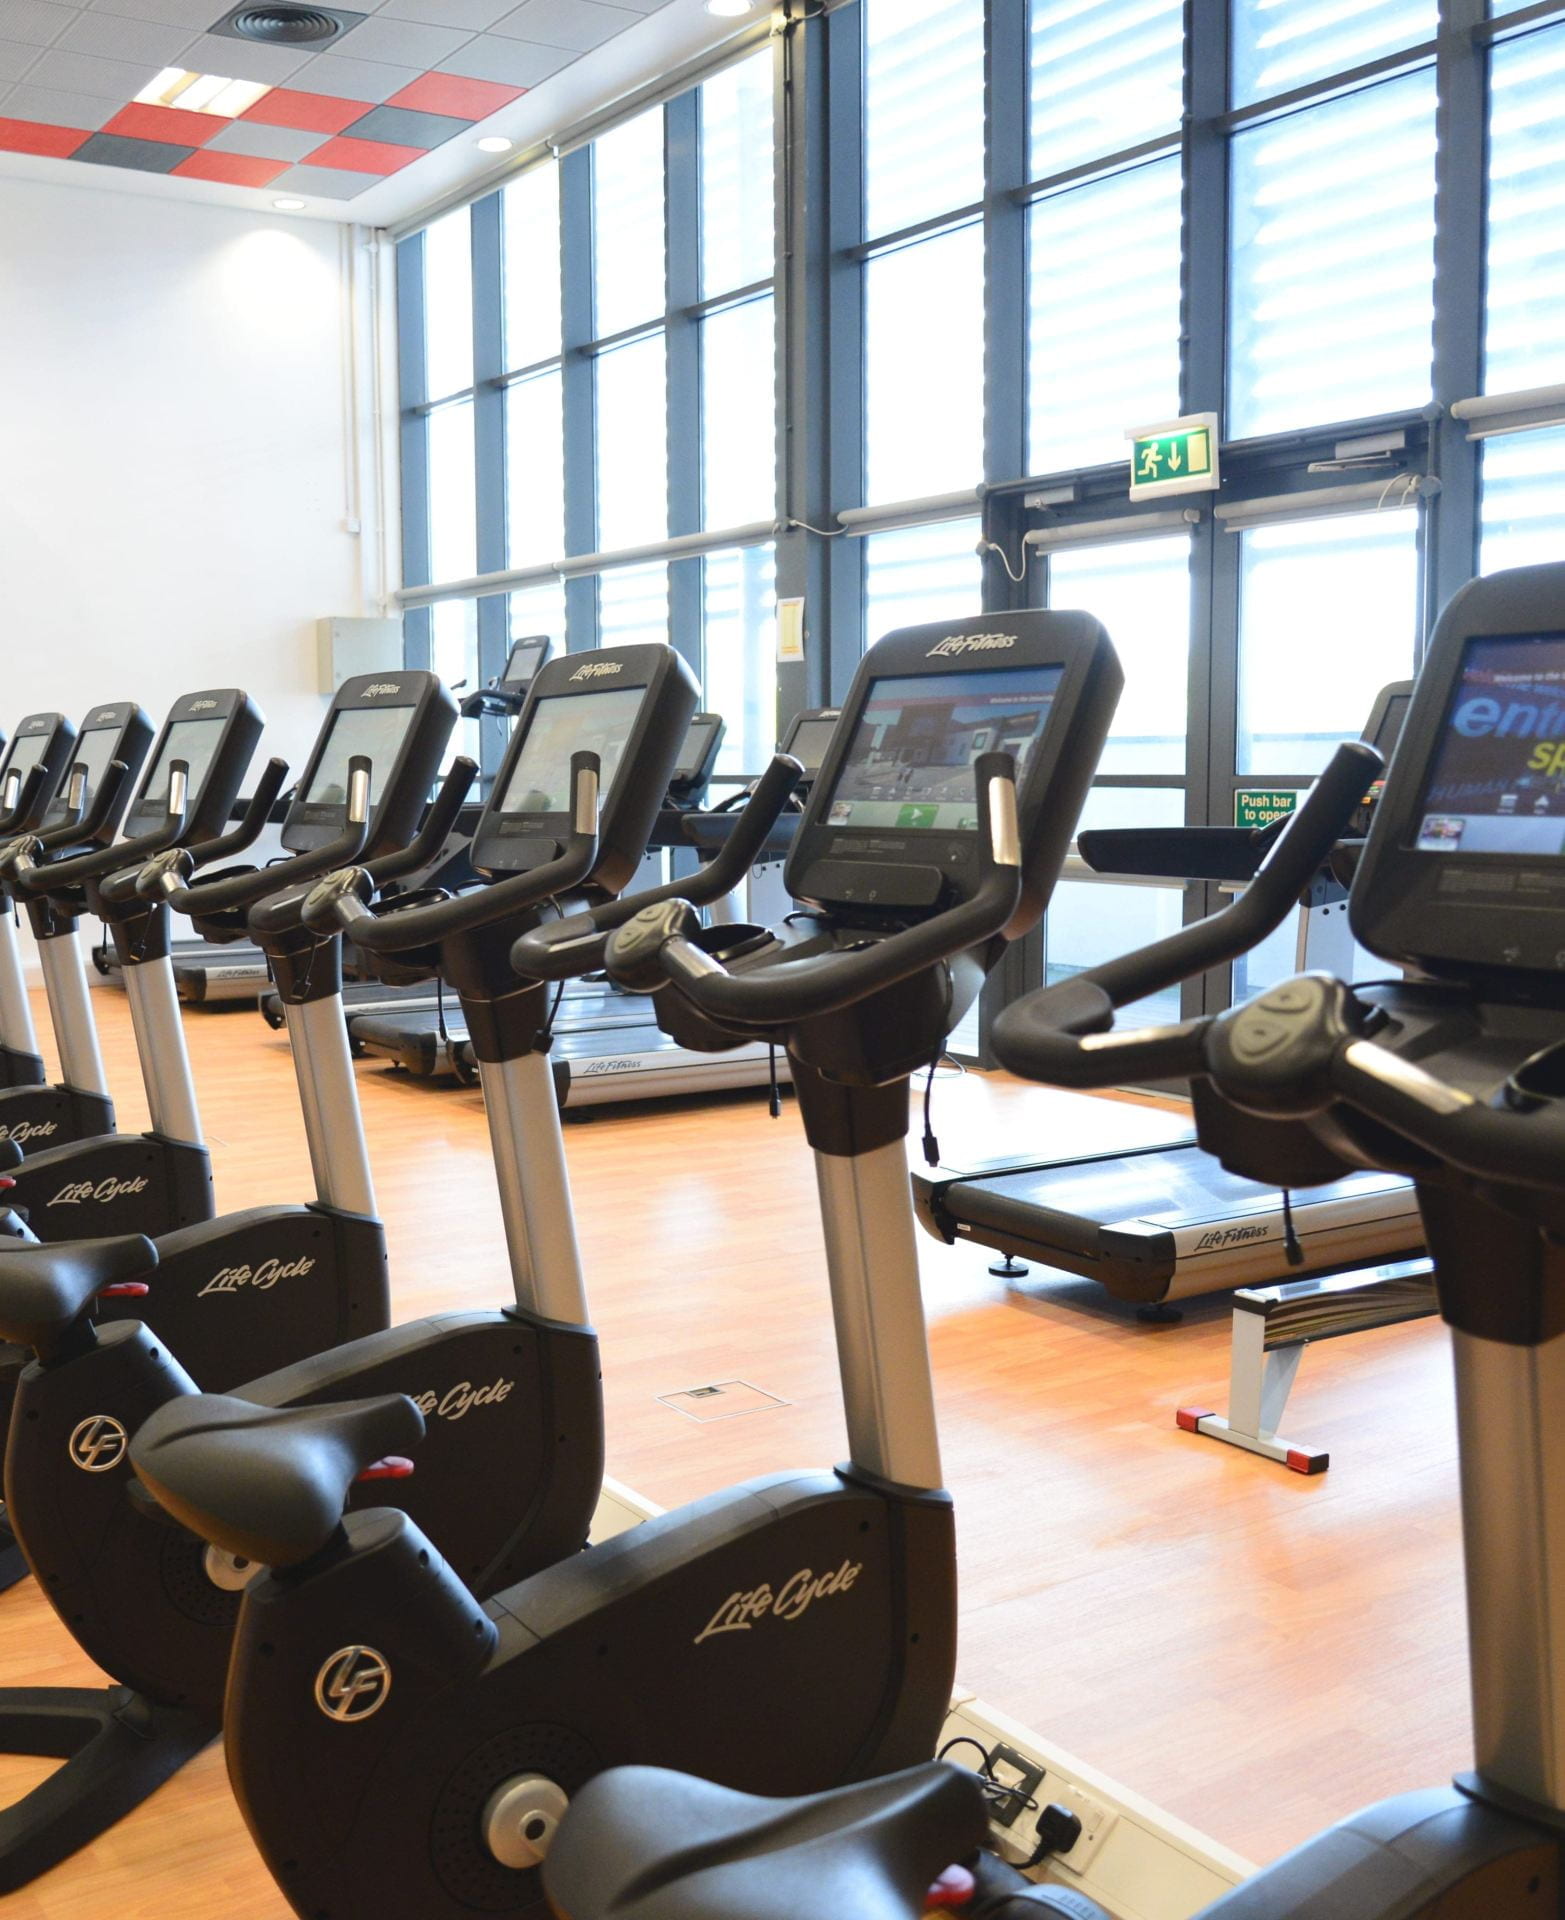 A picture of stationary bikes in the university of Lincoln gym, in front of treadmills